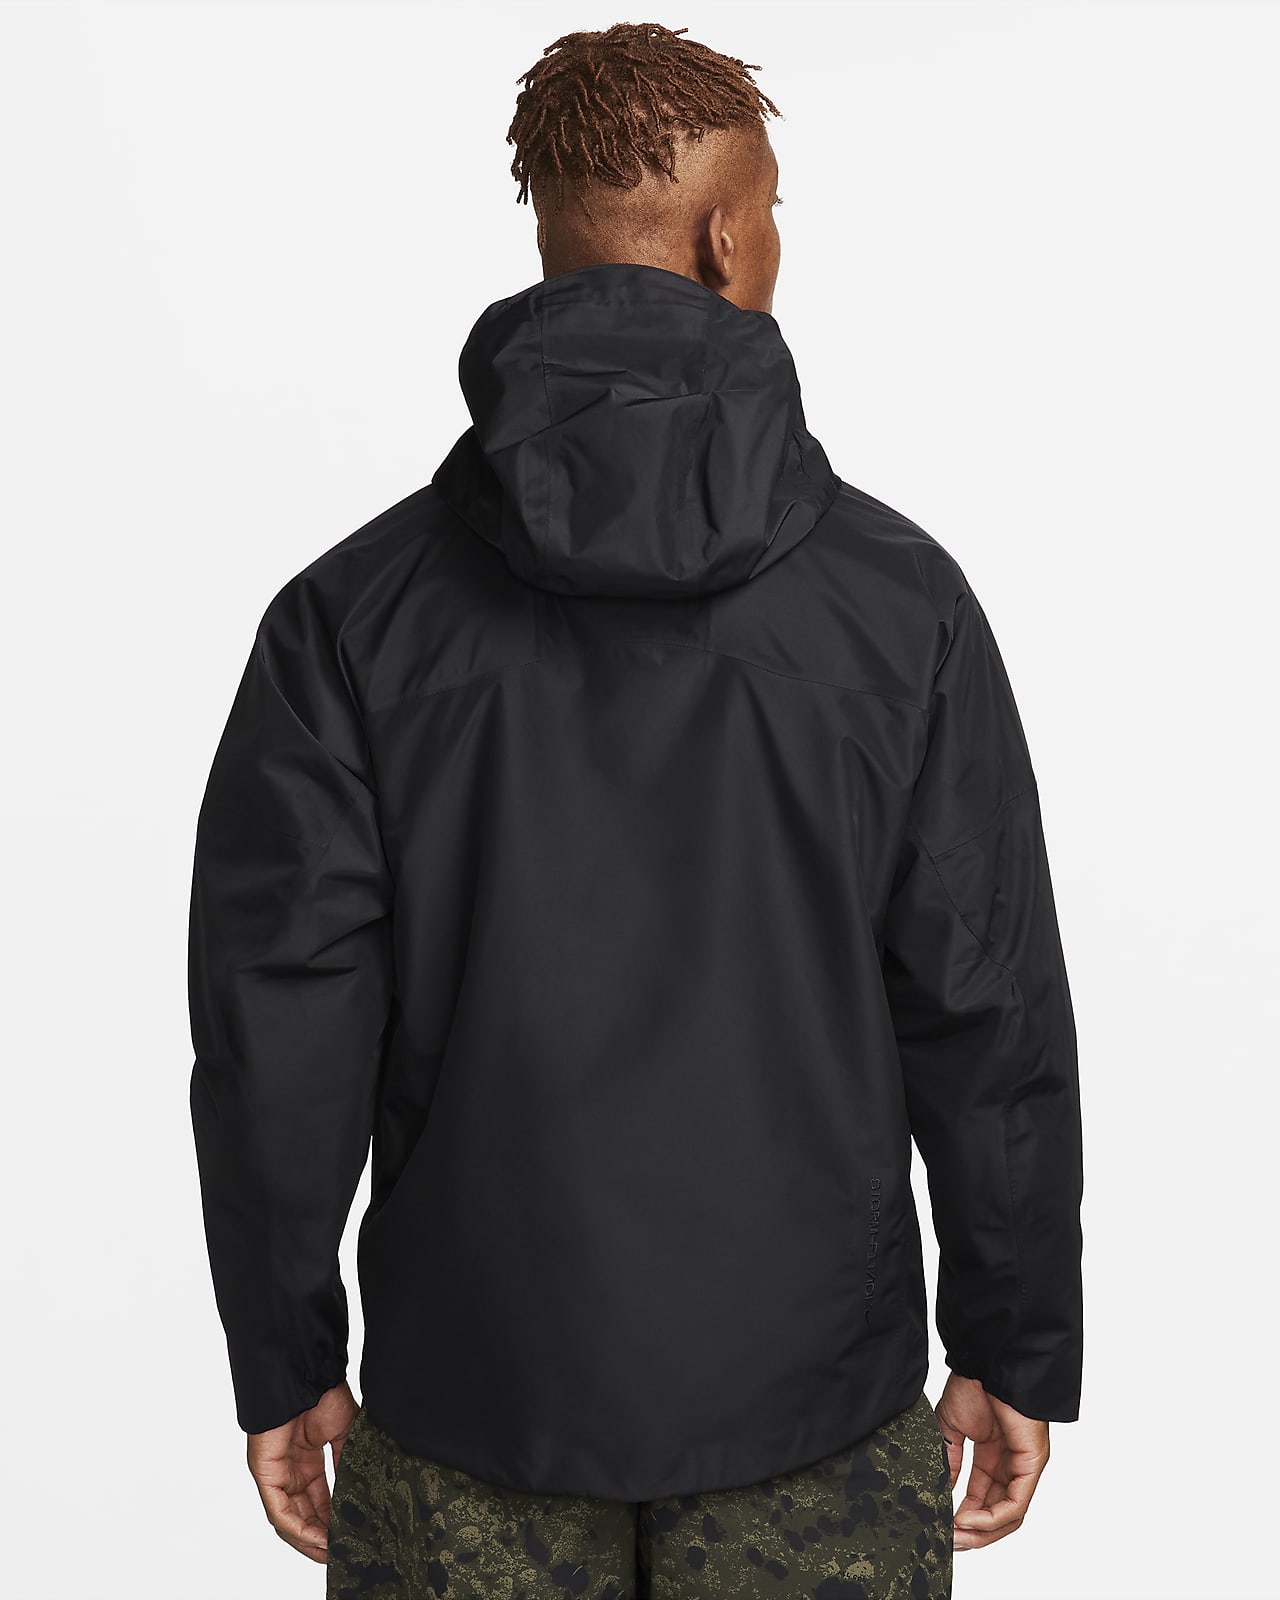 Nike Storm-FIT ADV ACG 'Chain of Craters' Men's Jacket